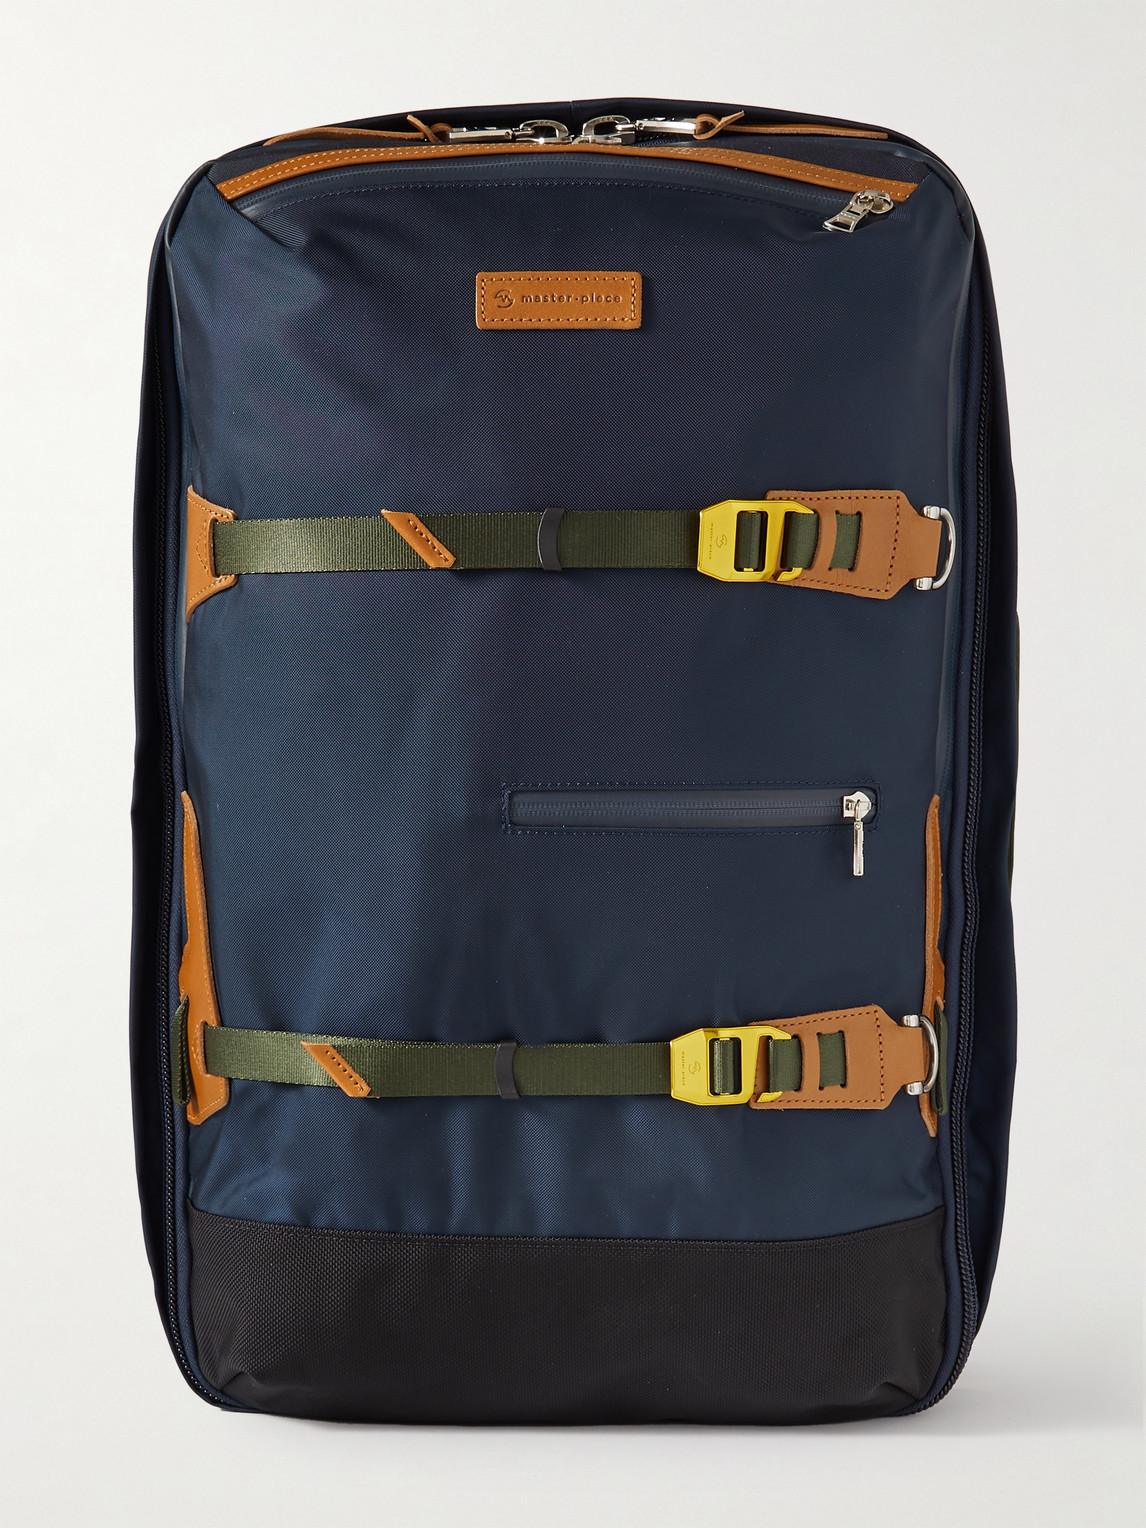 MASTER-PIECE POTENTIAL 3WAY CONVERTIBLE LEATHER AND CANVAS-TRIMMED CORDURA® MASTERTEX BACKPACK